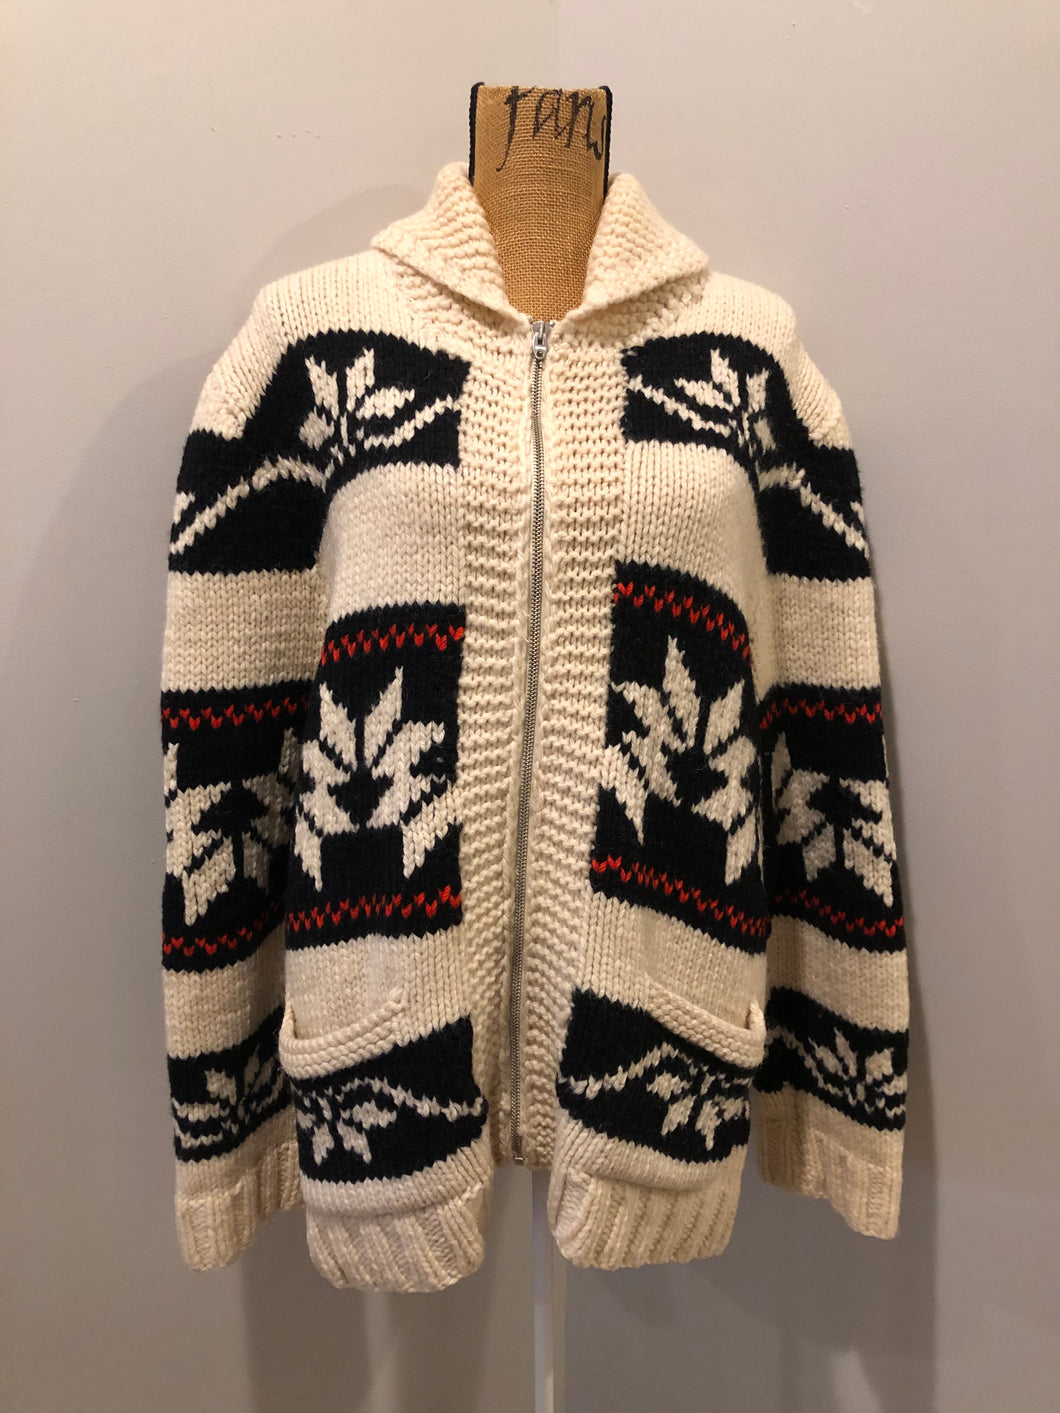 Kingspier Vintage - Cowichan hand spun, hand knit wool cardigan in cream, black and red with floral design, zipper and pockets. Size large.